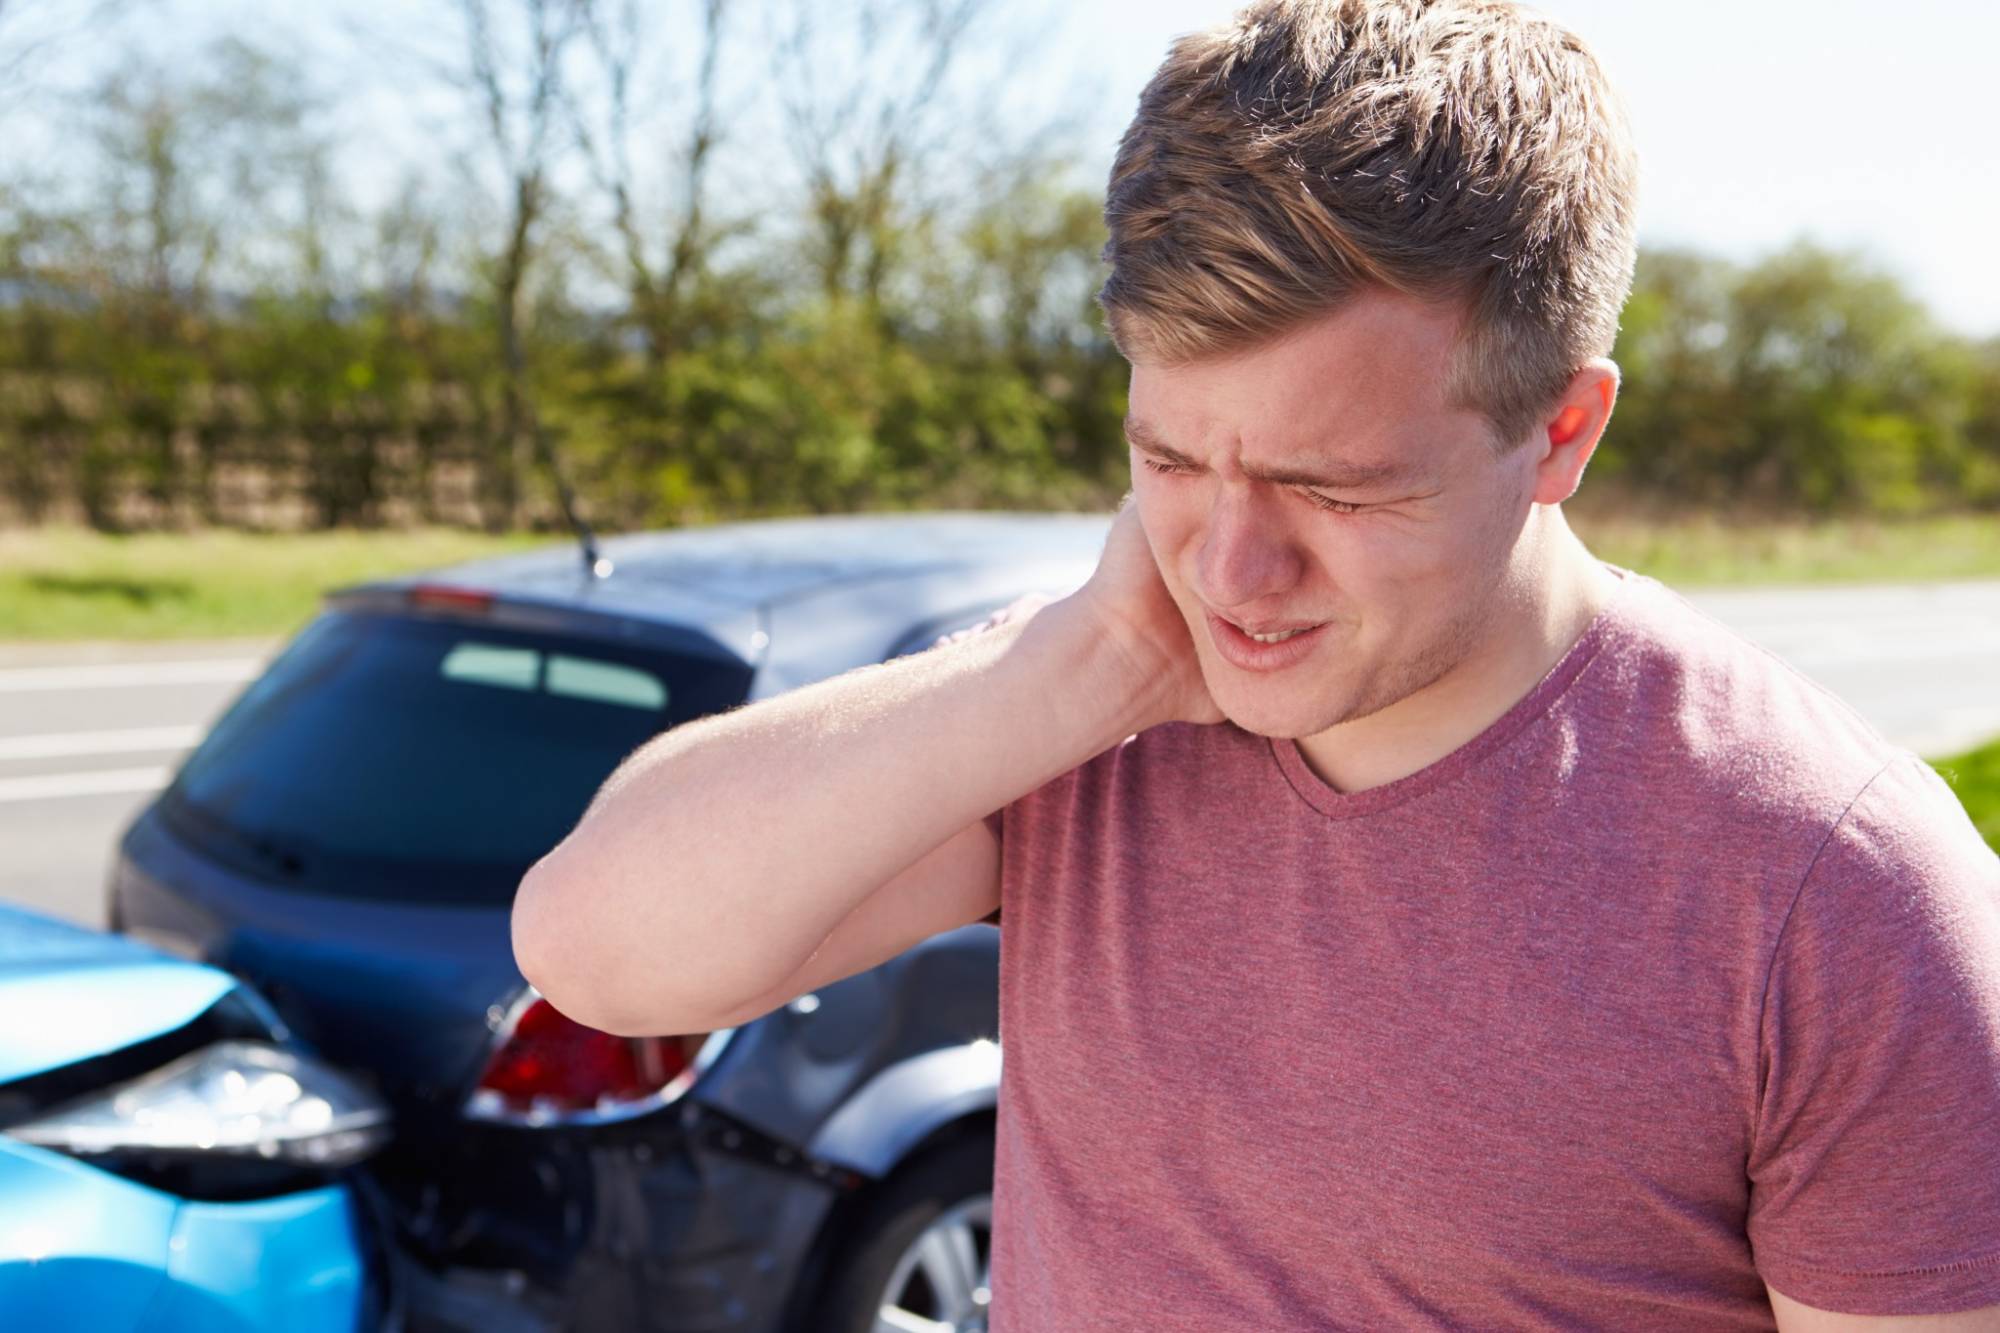 Car accident 3 - large - Injury Lawyers Queensland